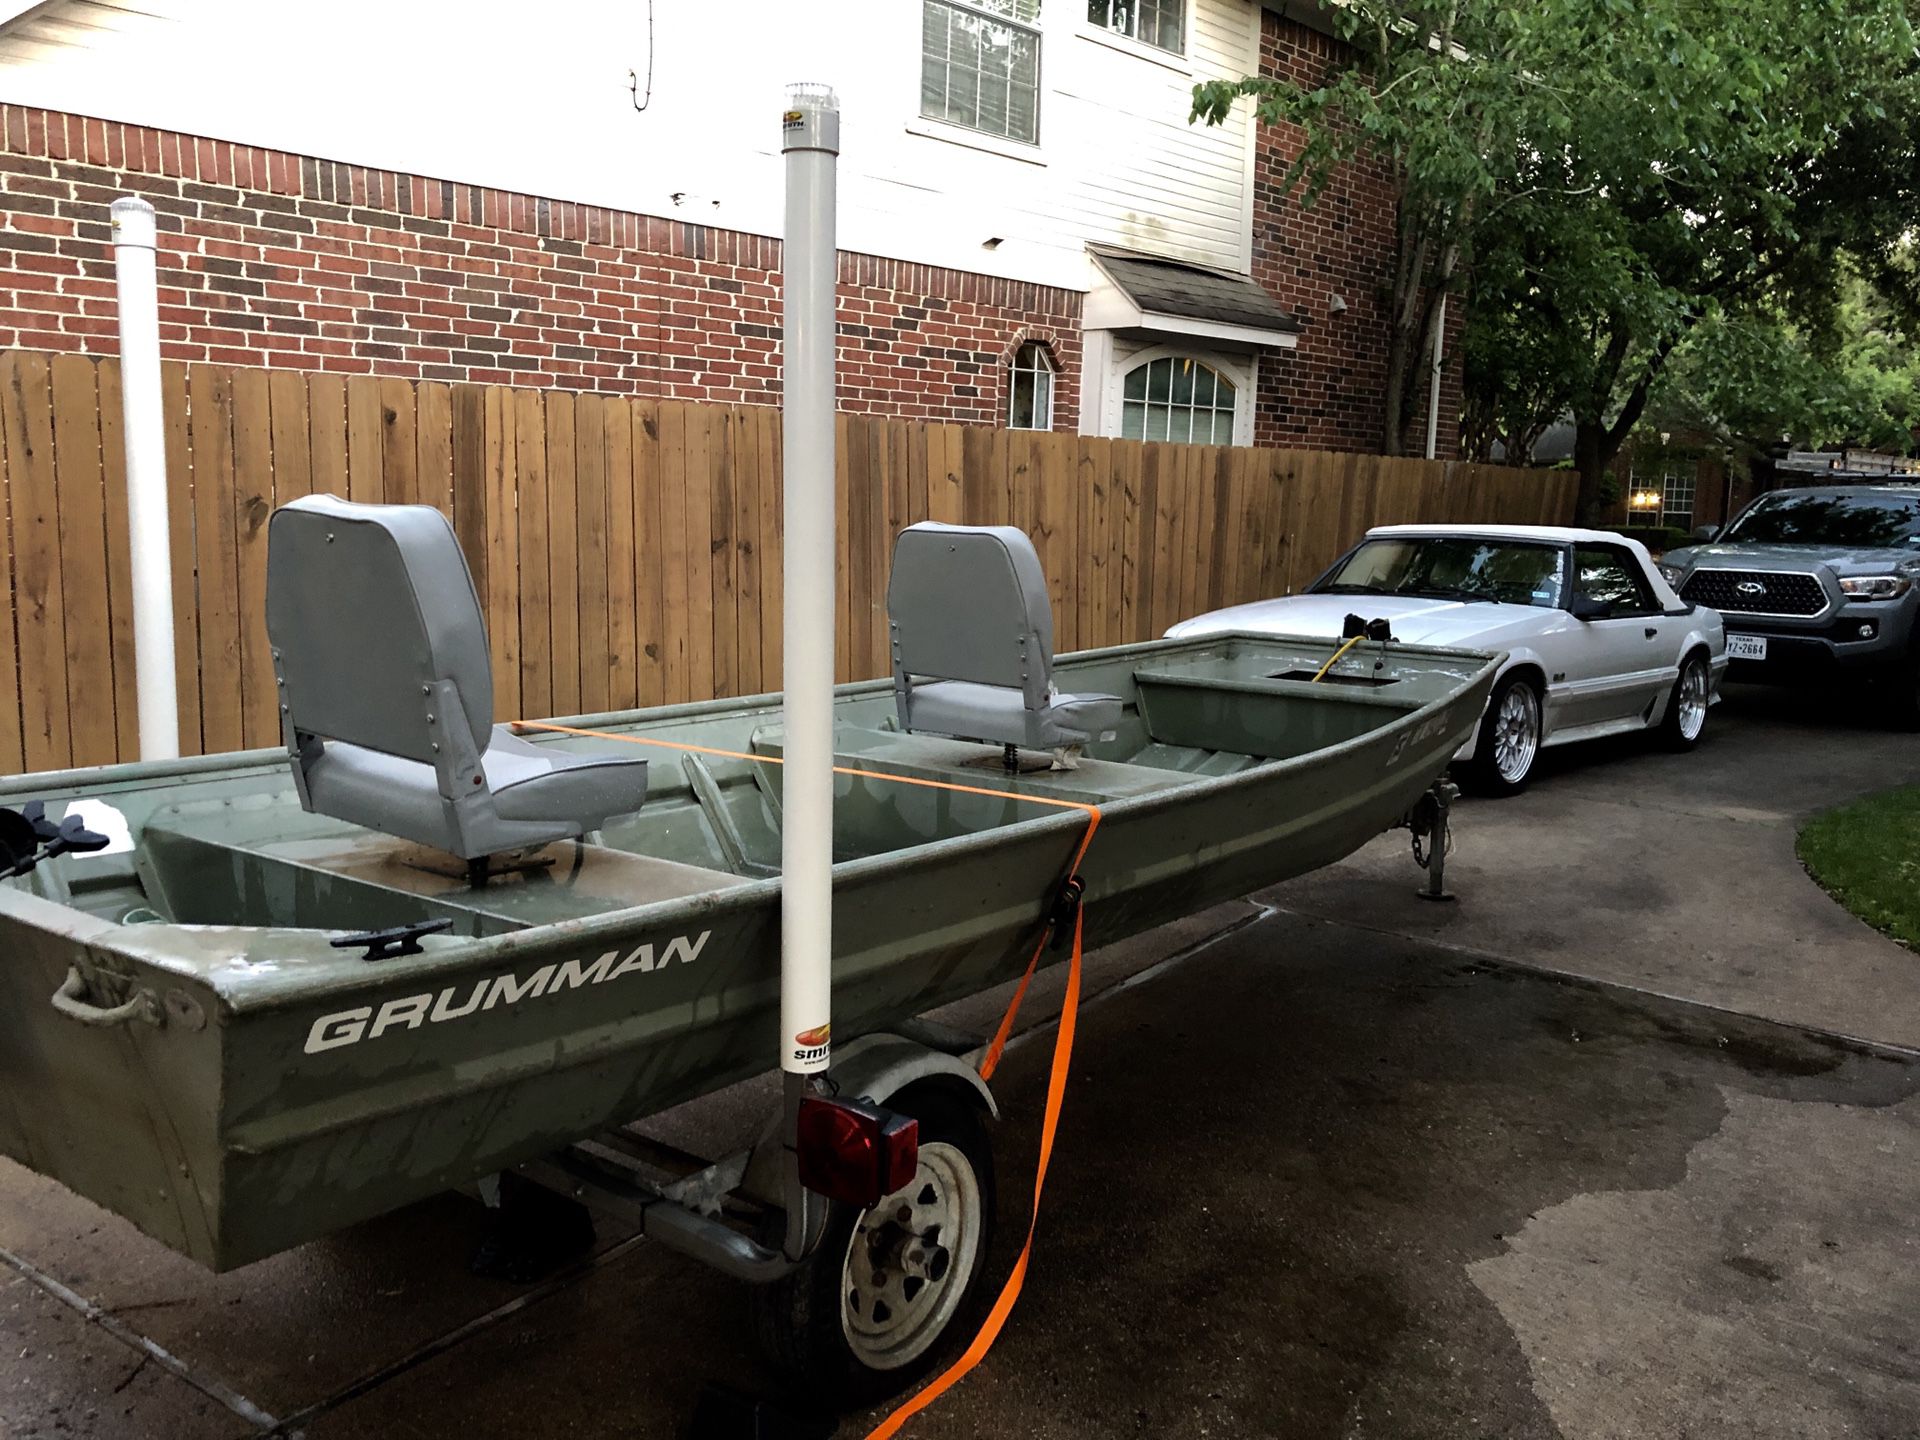 14’ x32 Aluminum Jon Boat. Have additional equipment that will be sold separately or included with a discount.